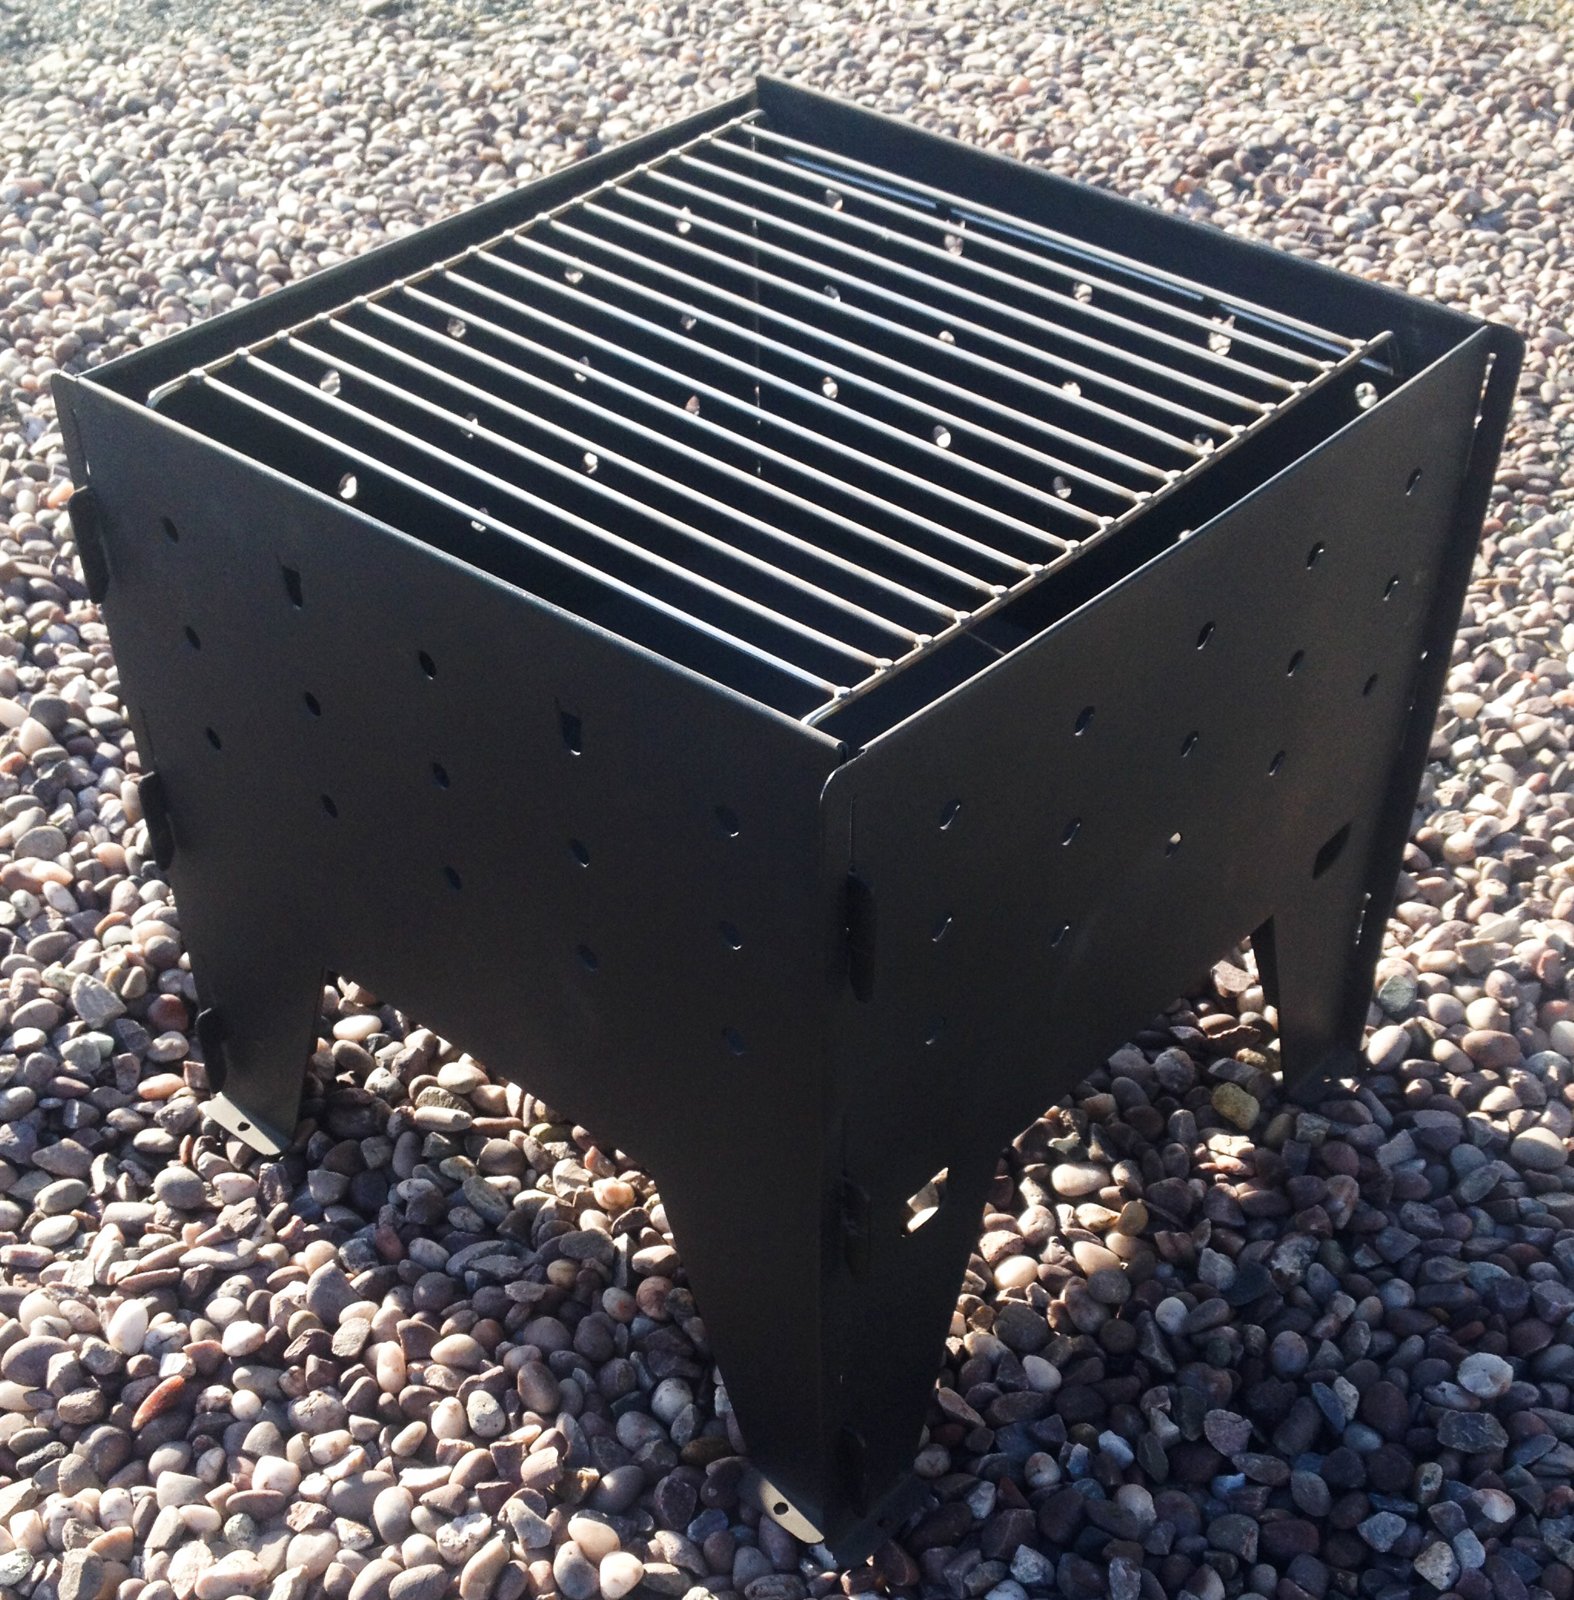 Made O Metal Interlocking Fold Away Brazier Fire Pit Garden Firepit intended for sizing 1574 X 1600